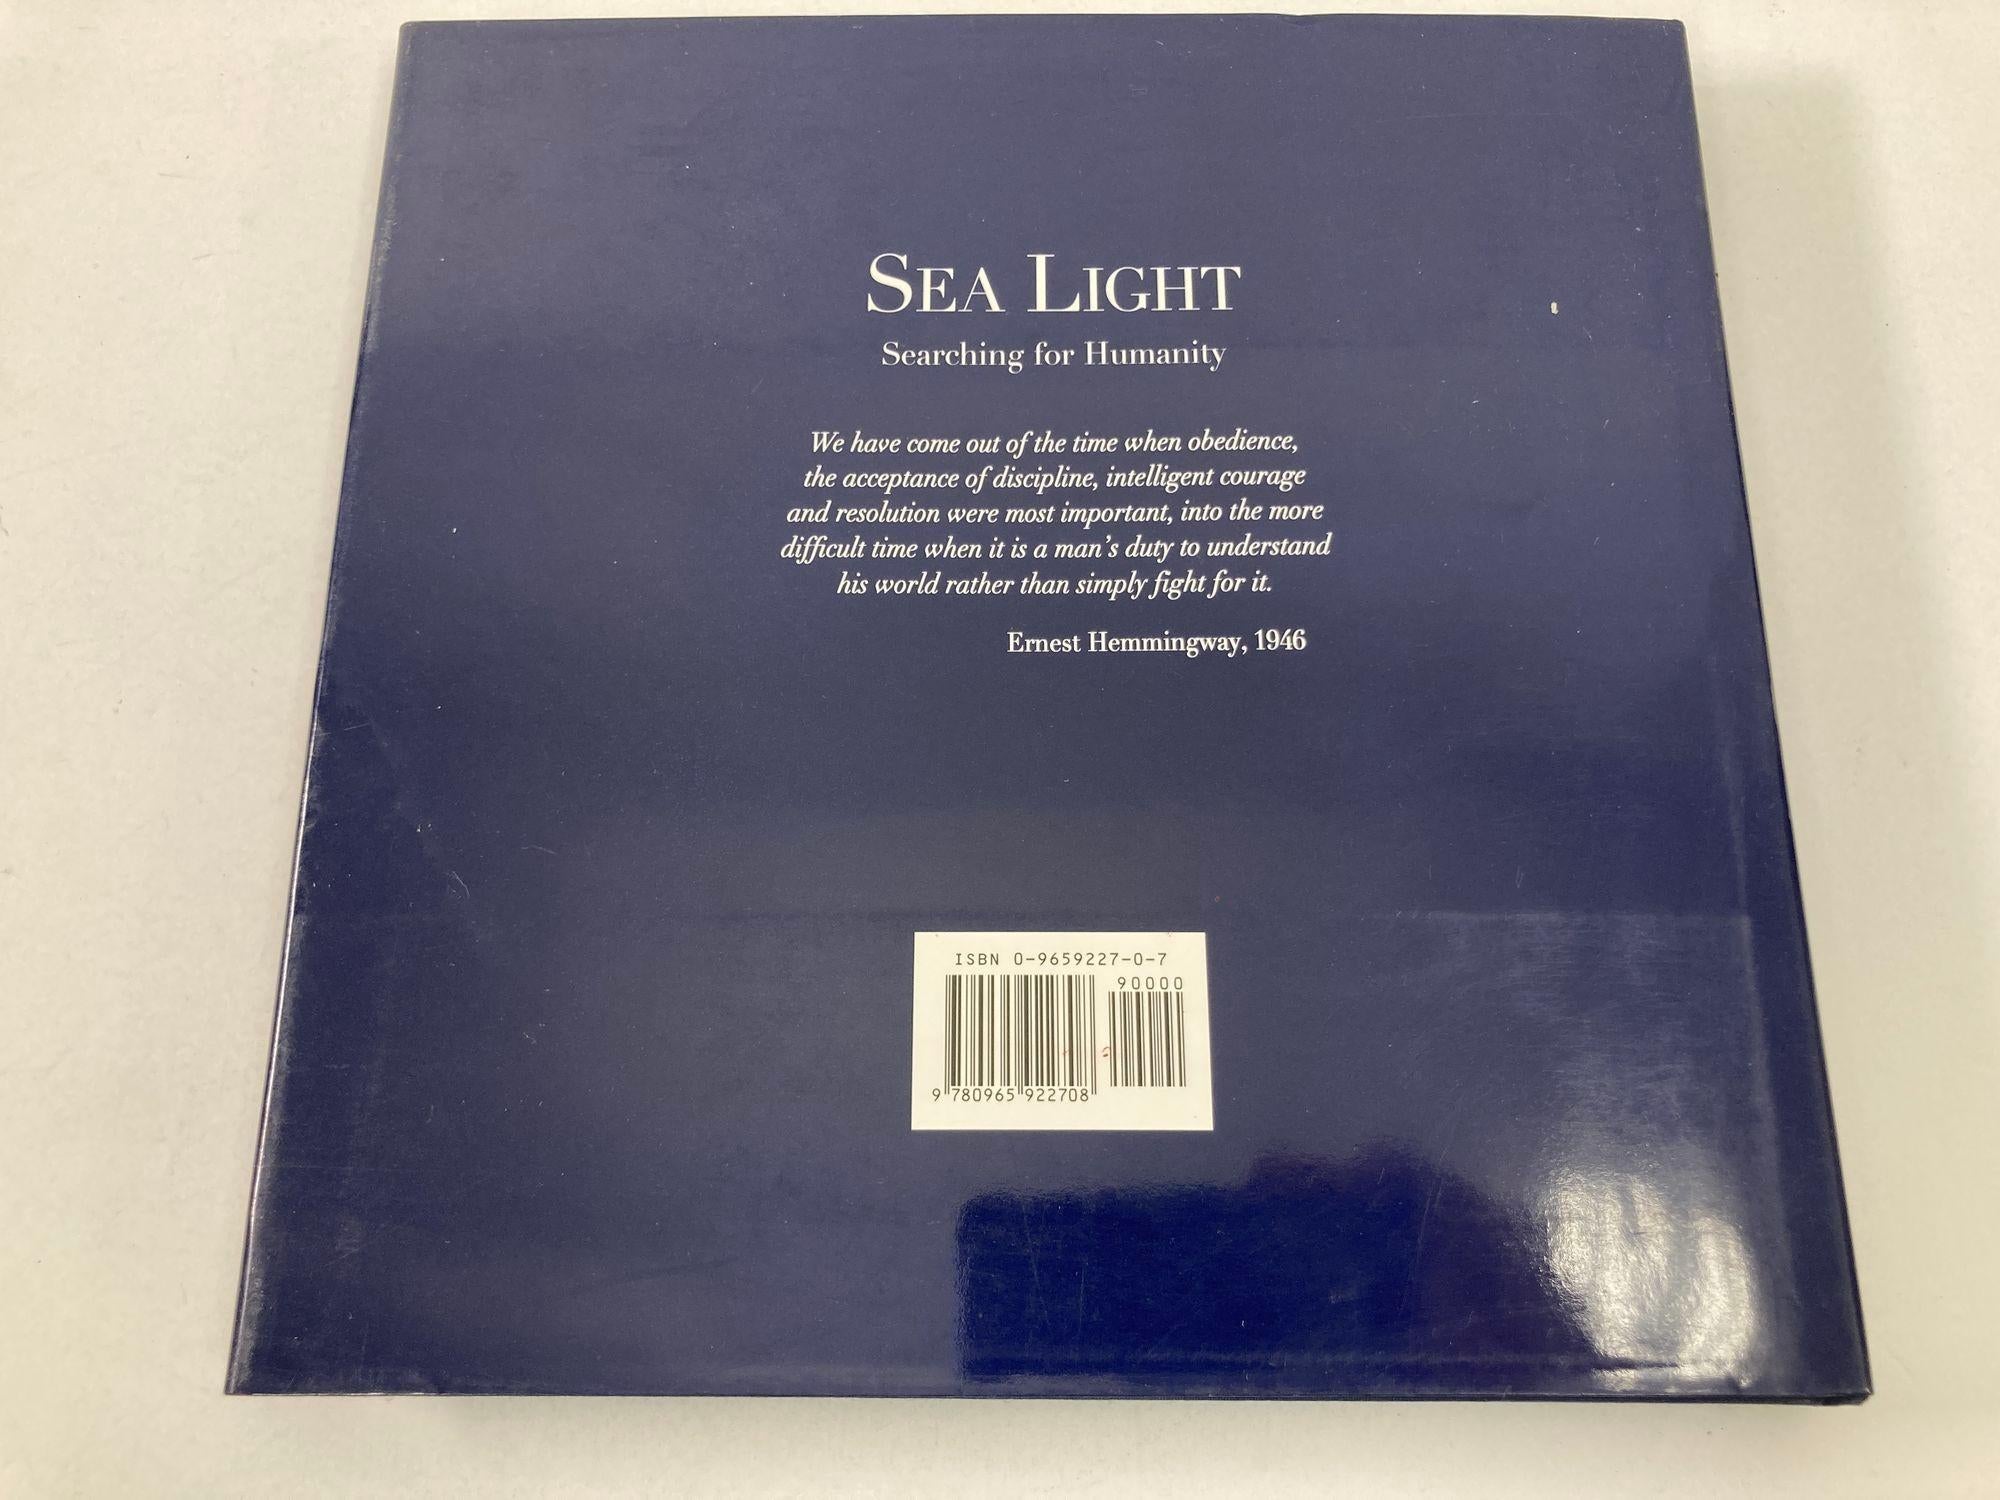 Sea Light by Paul Liebhardt Hardcover Book.
Sea Light, Semester at Sea. A Photographic Essay by Paul Liebhardt HC.
Published by Institute for Shipboard Education, University of Pittsburgh (1997)
Paul Liebhardt's lush new book of photographs, 